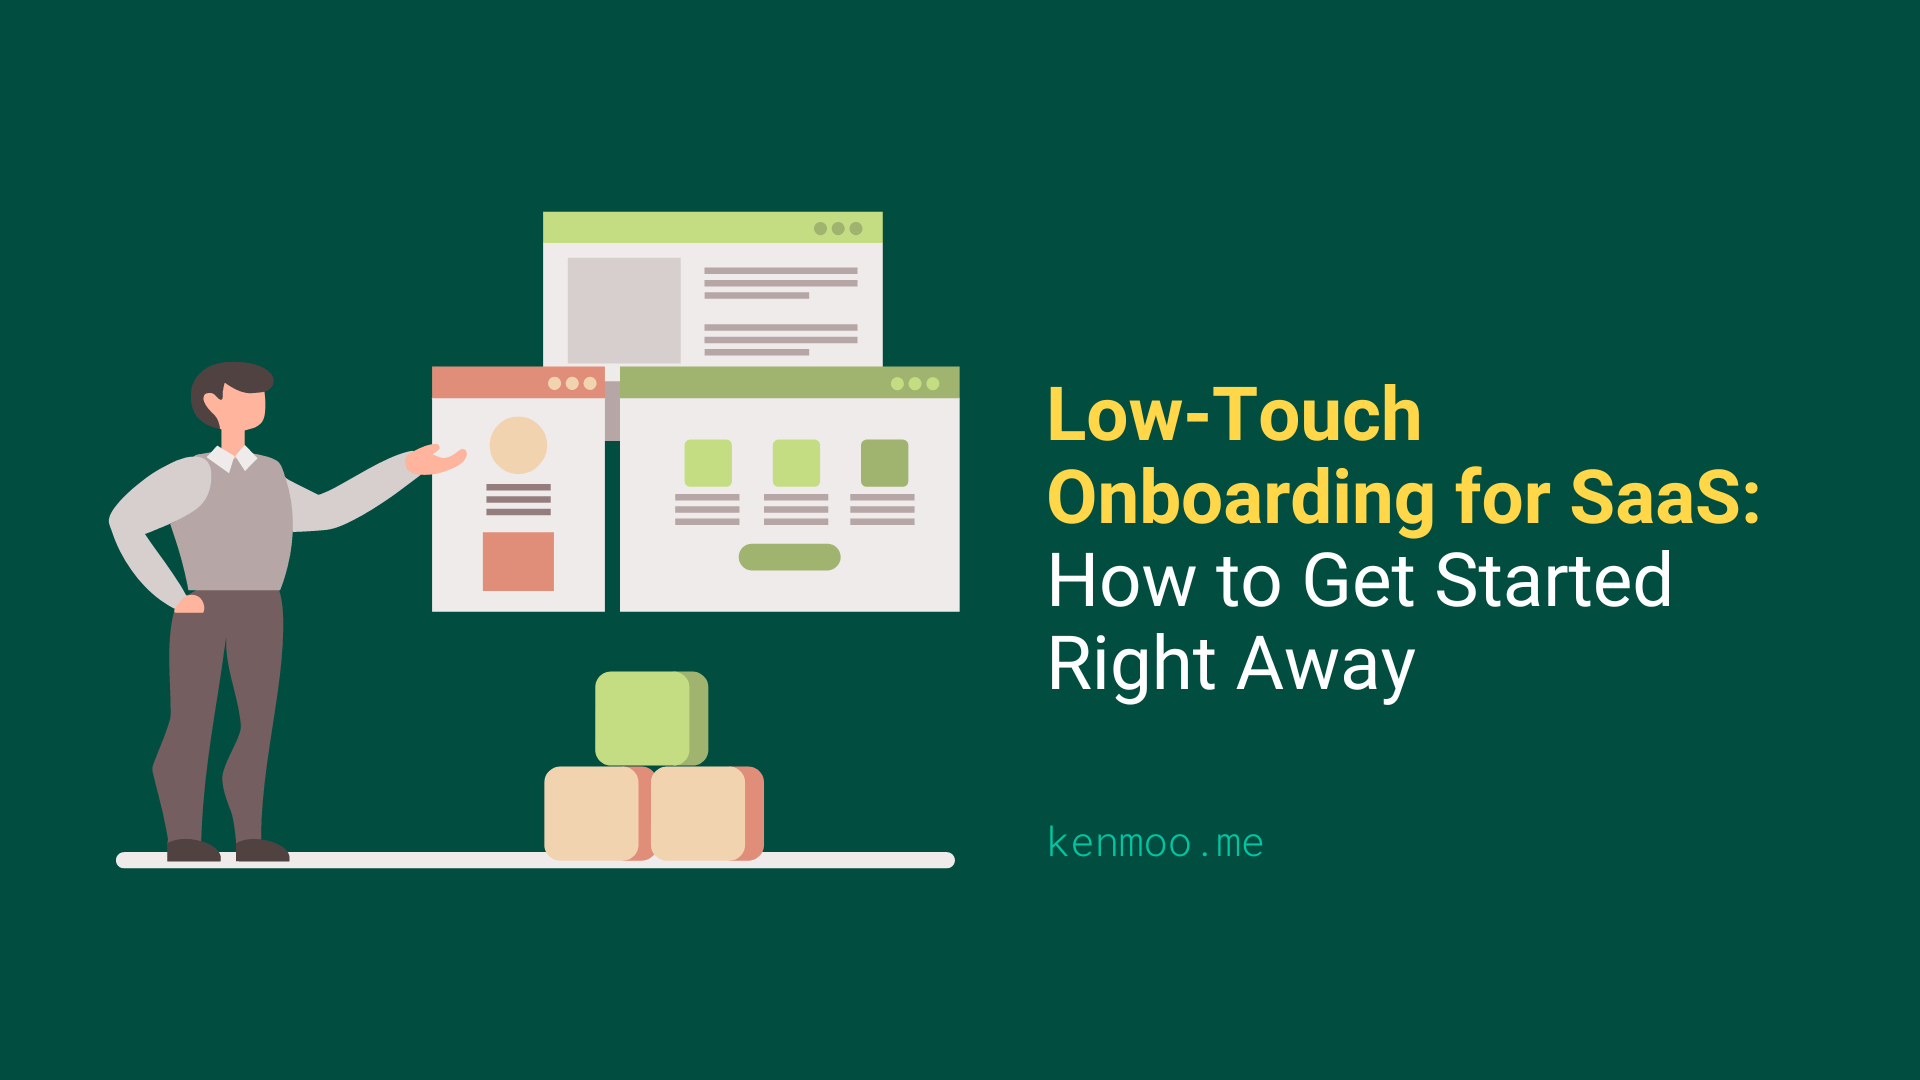 Low-Touch Onboarding for SaaS: How to Get Started Right Away